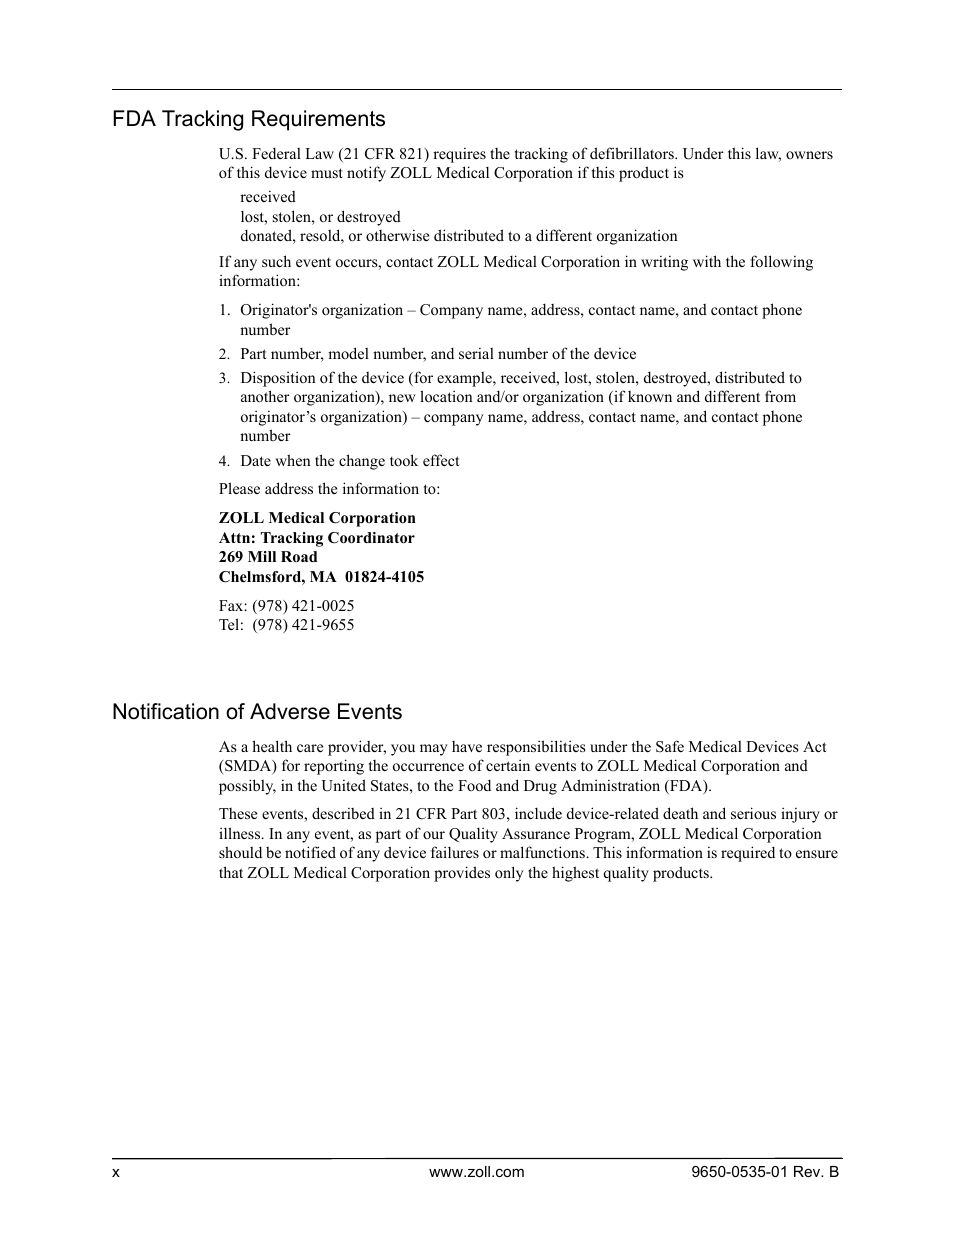 Fda tracking requirements, Notification of adverse events | ZOLL SurePower Rev B Charger Station User Manual | Page 14 / 44